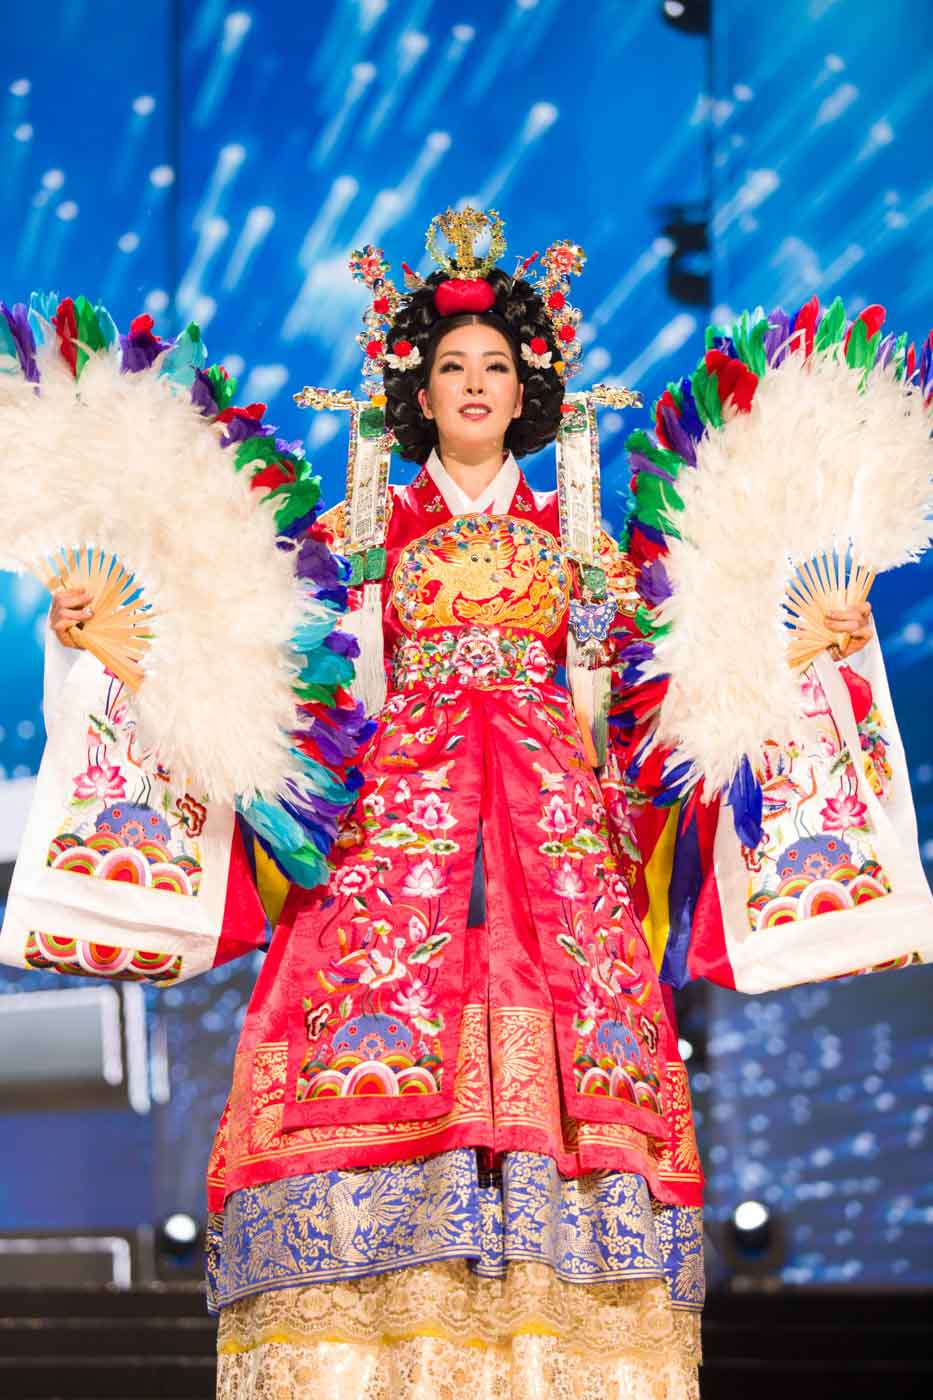 IN PHOTOS: The national costumes at Miss Universe 2017